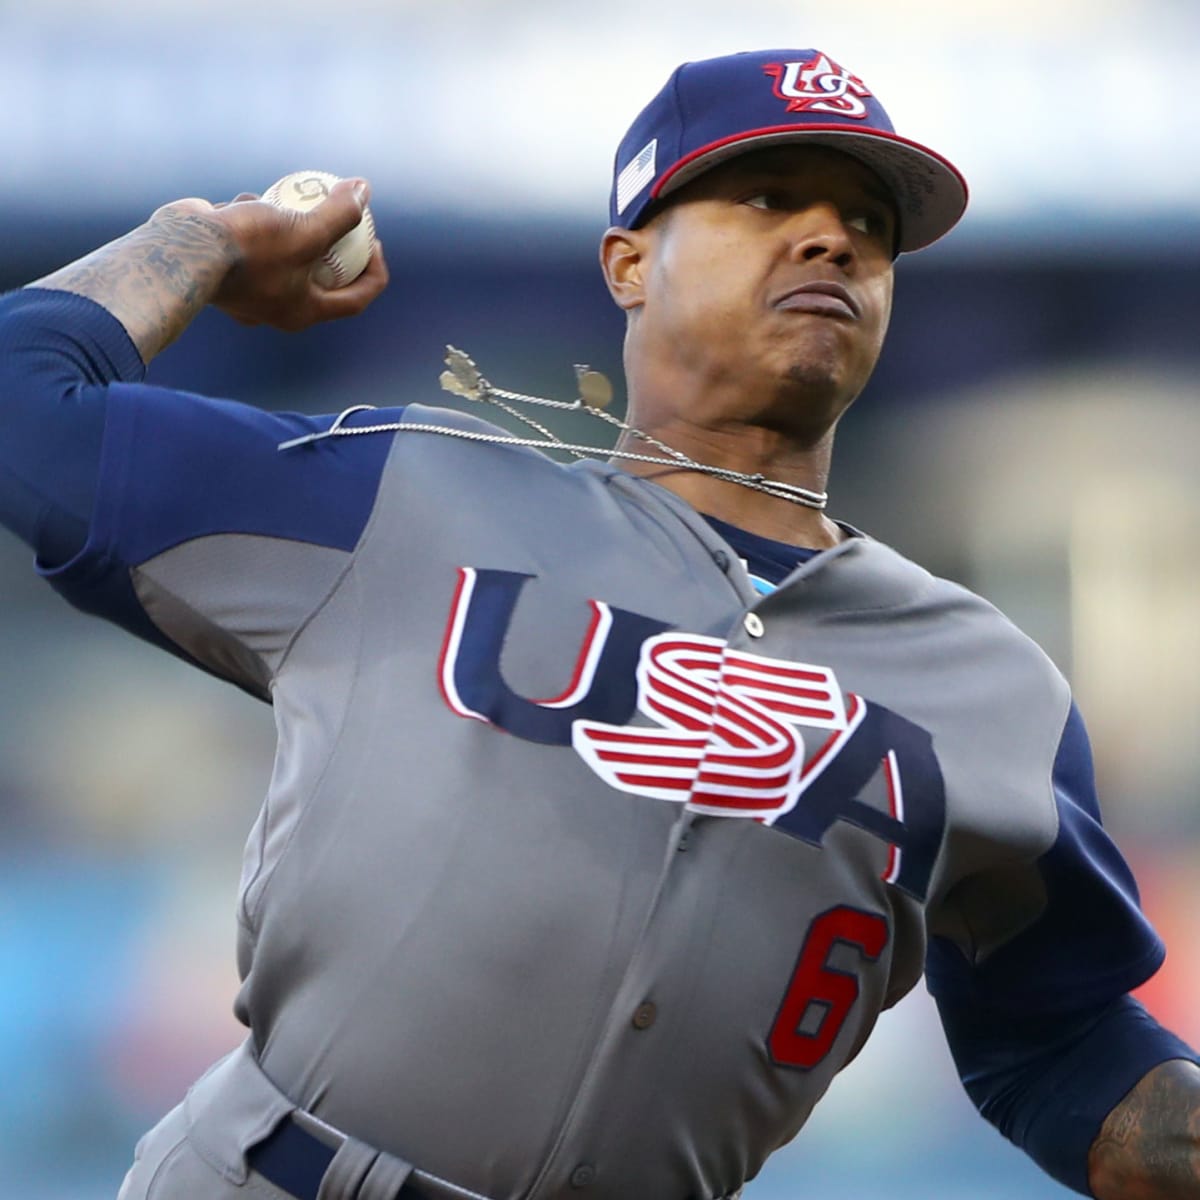 US routs Puerto Rico 8-0 to win WBC behind dominant Stroman